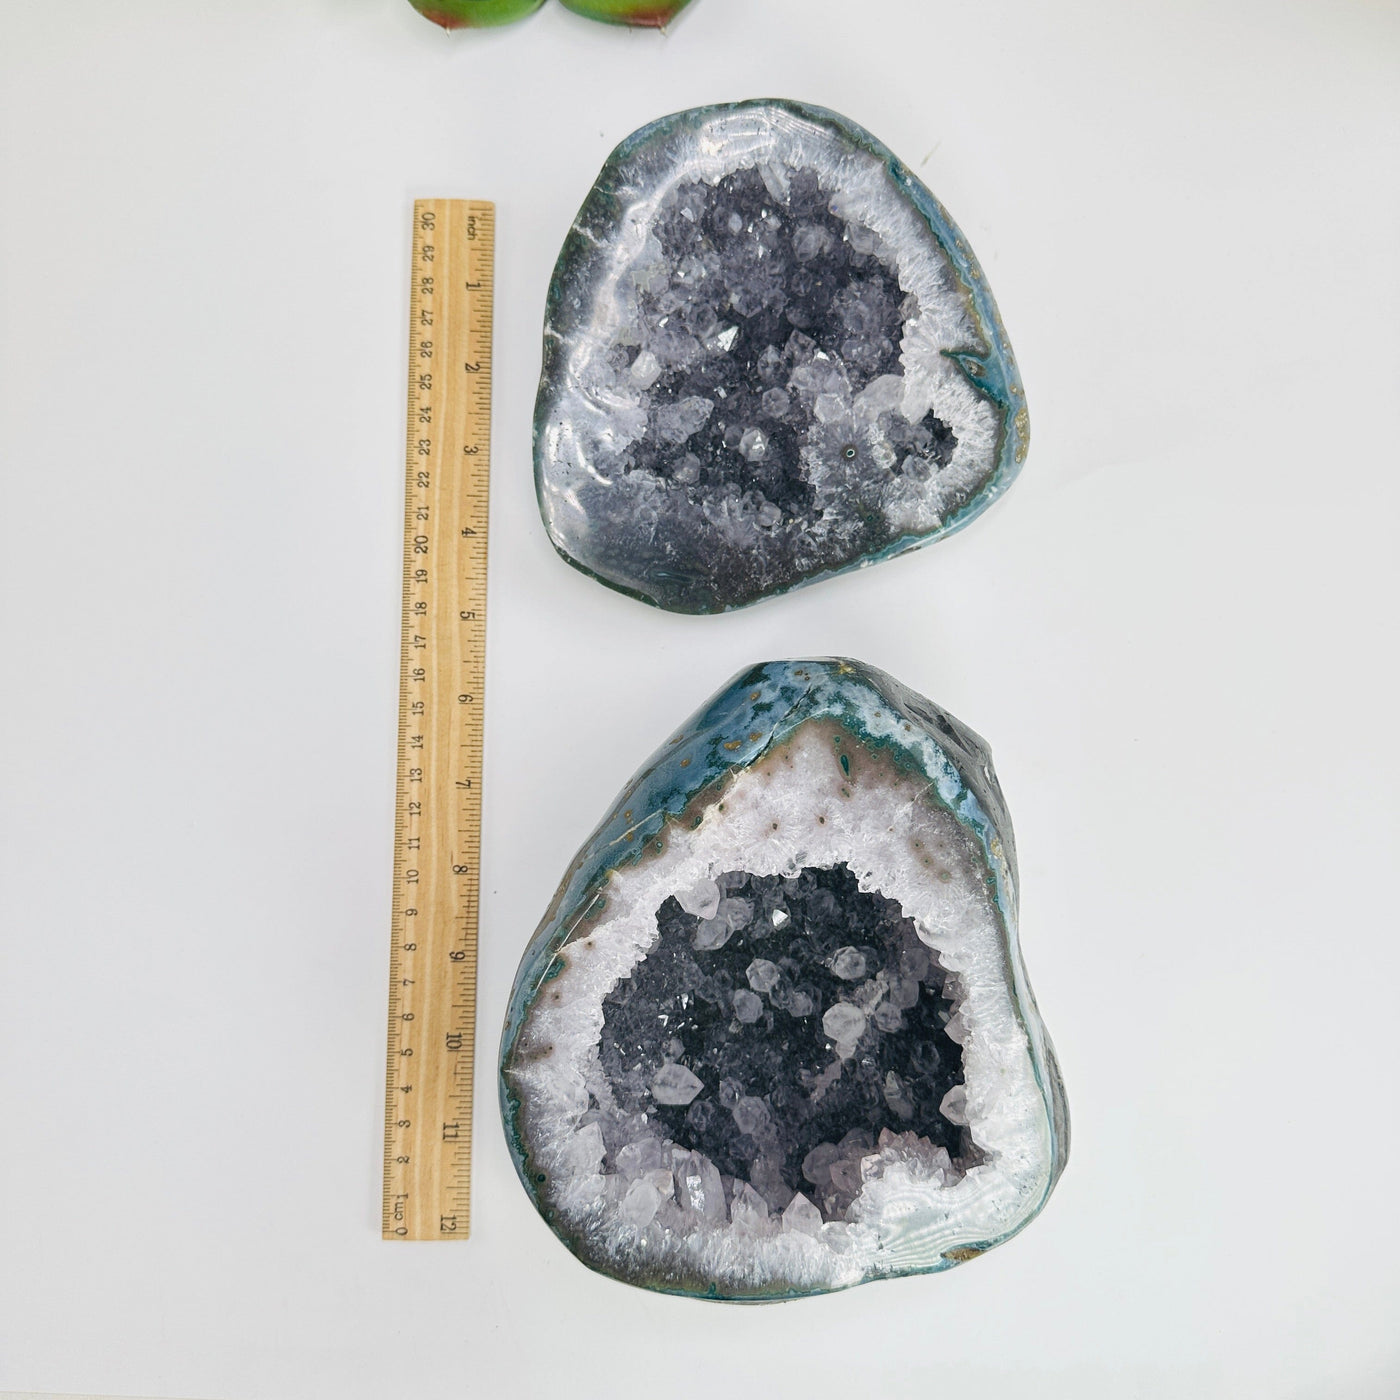 amethyst geode box next to a ruler for size reference